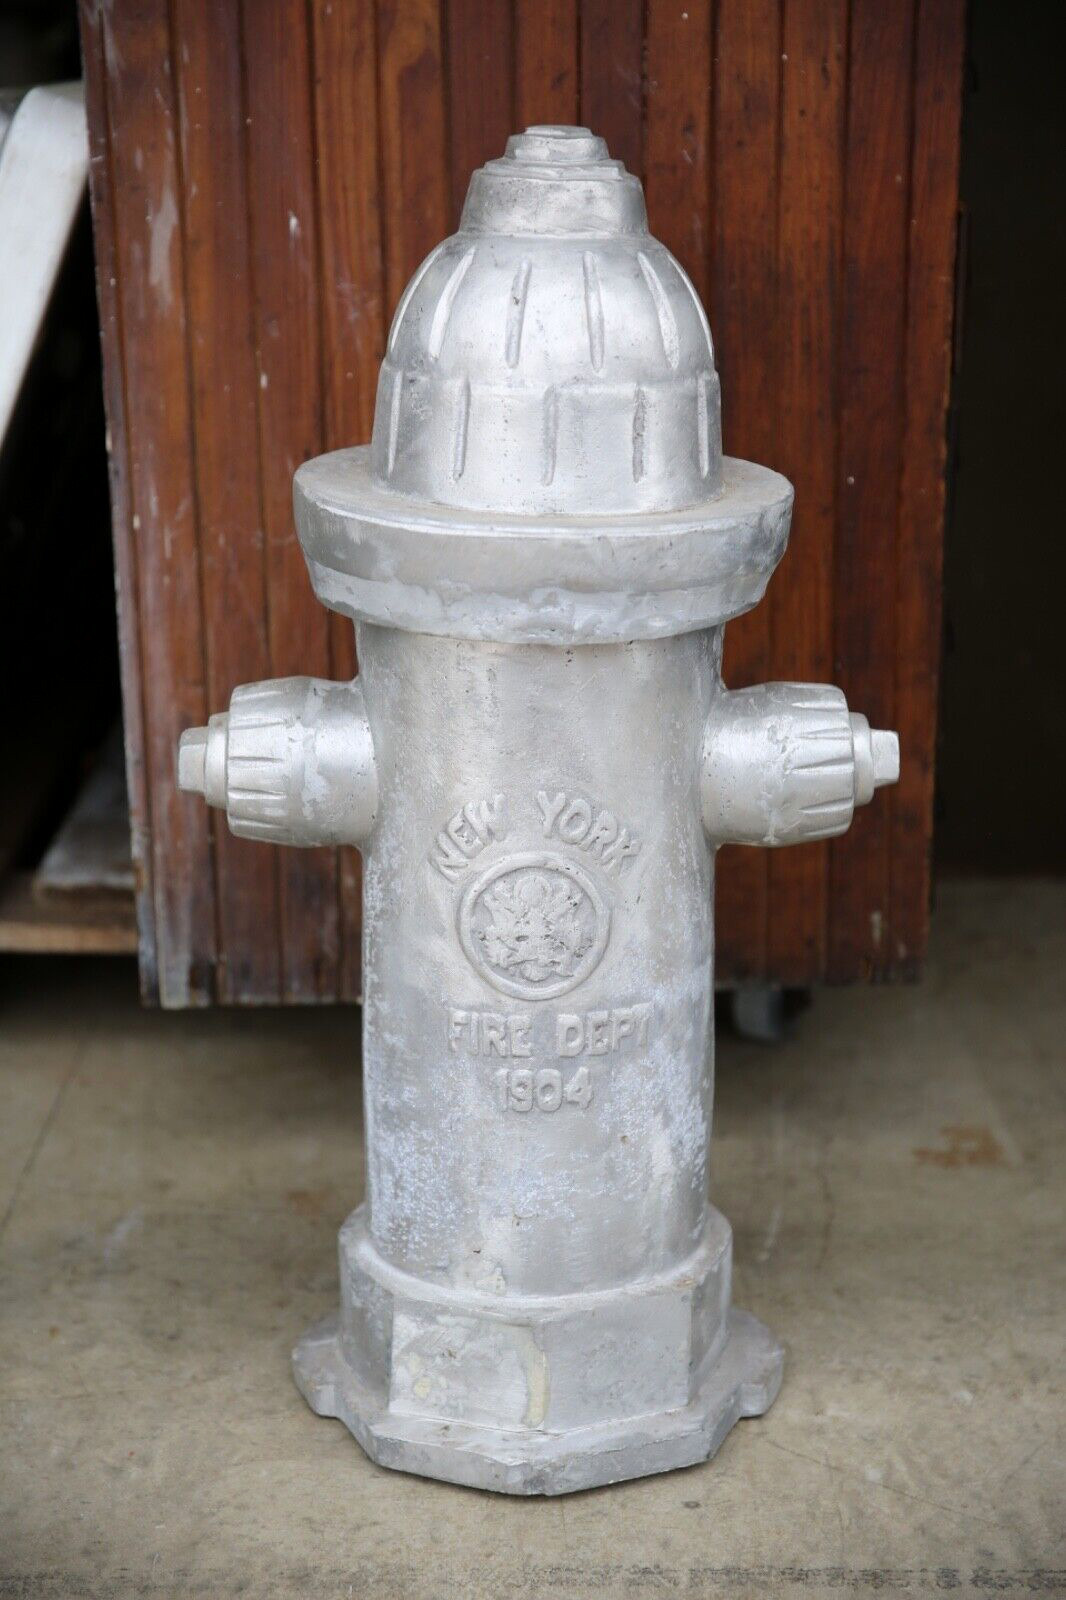 Vintage Cast Metal Fire Hydrant New York City 1904 Foundry Mold Casting statue